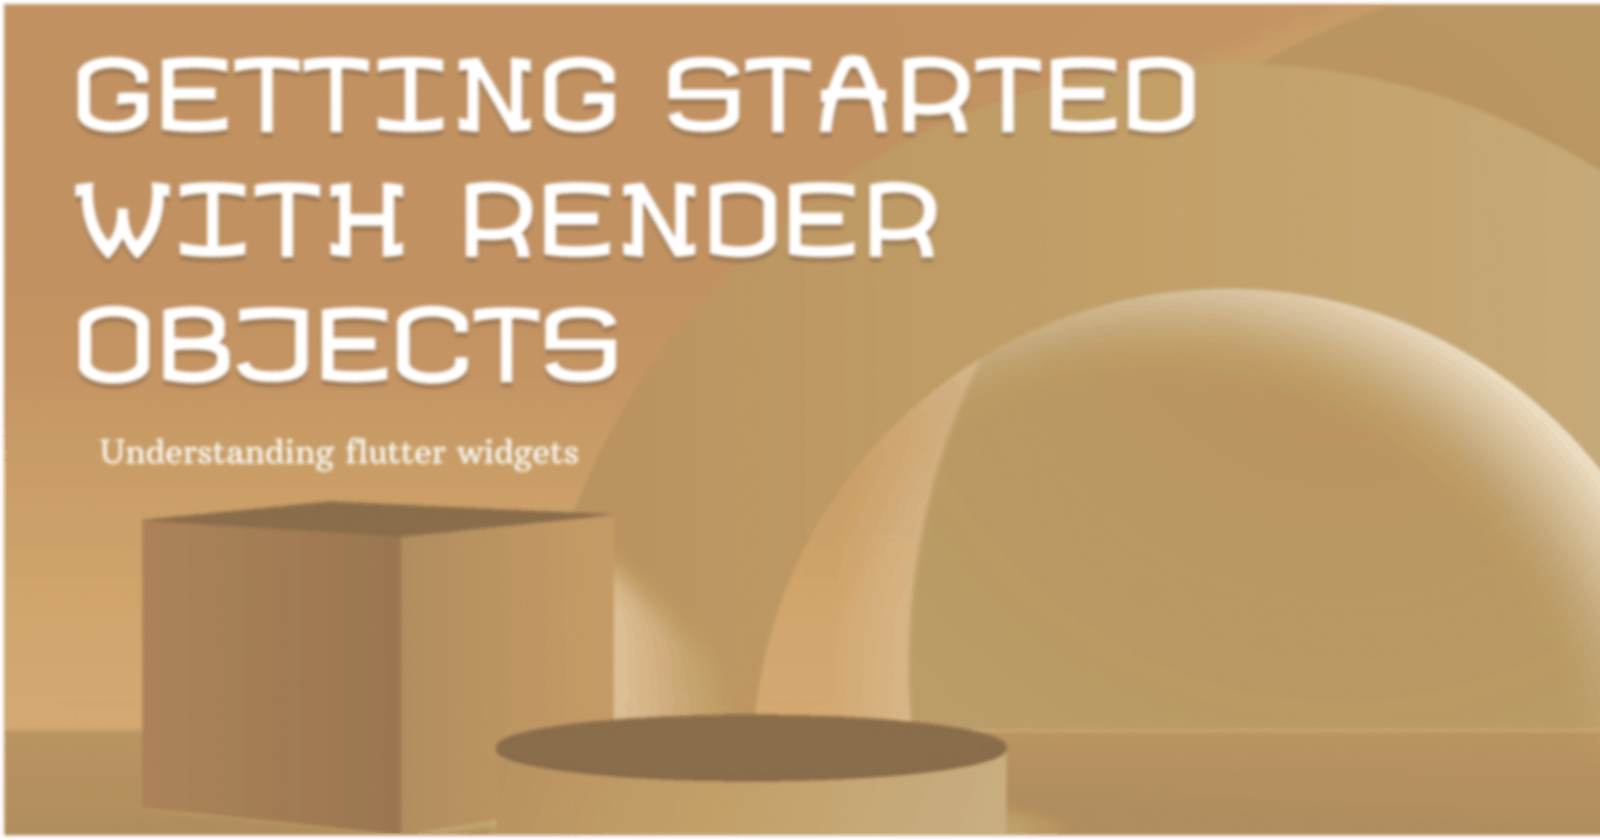 Getting started with RenderObjects in Flutter